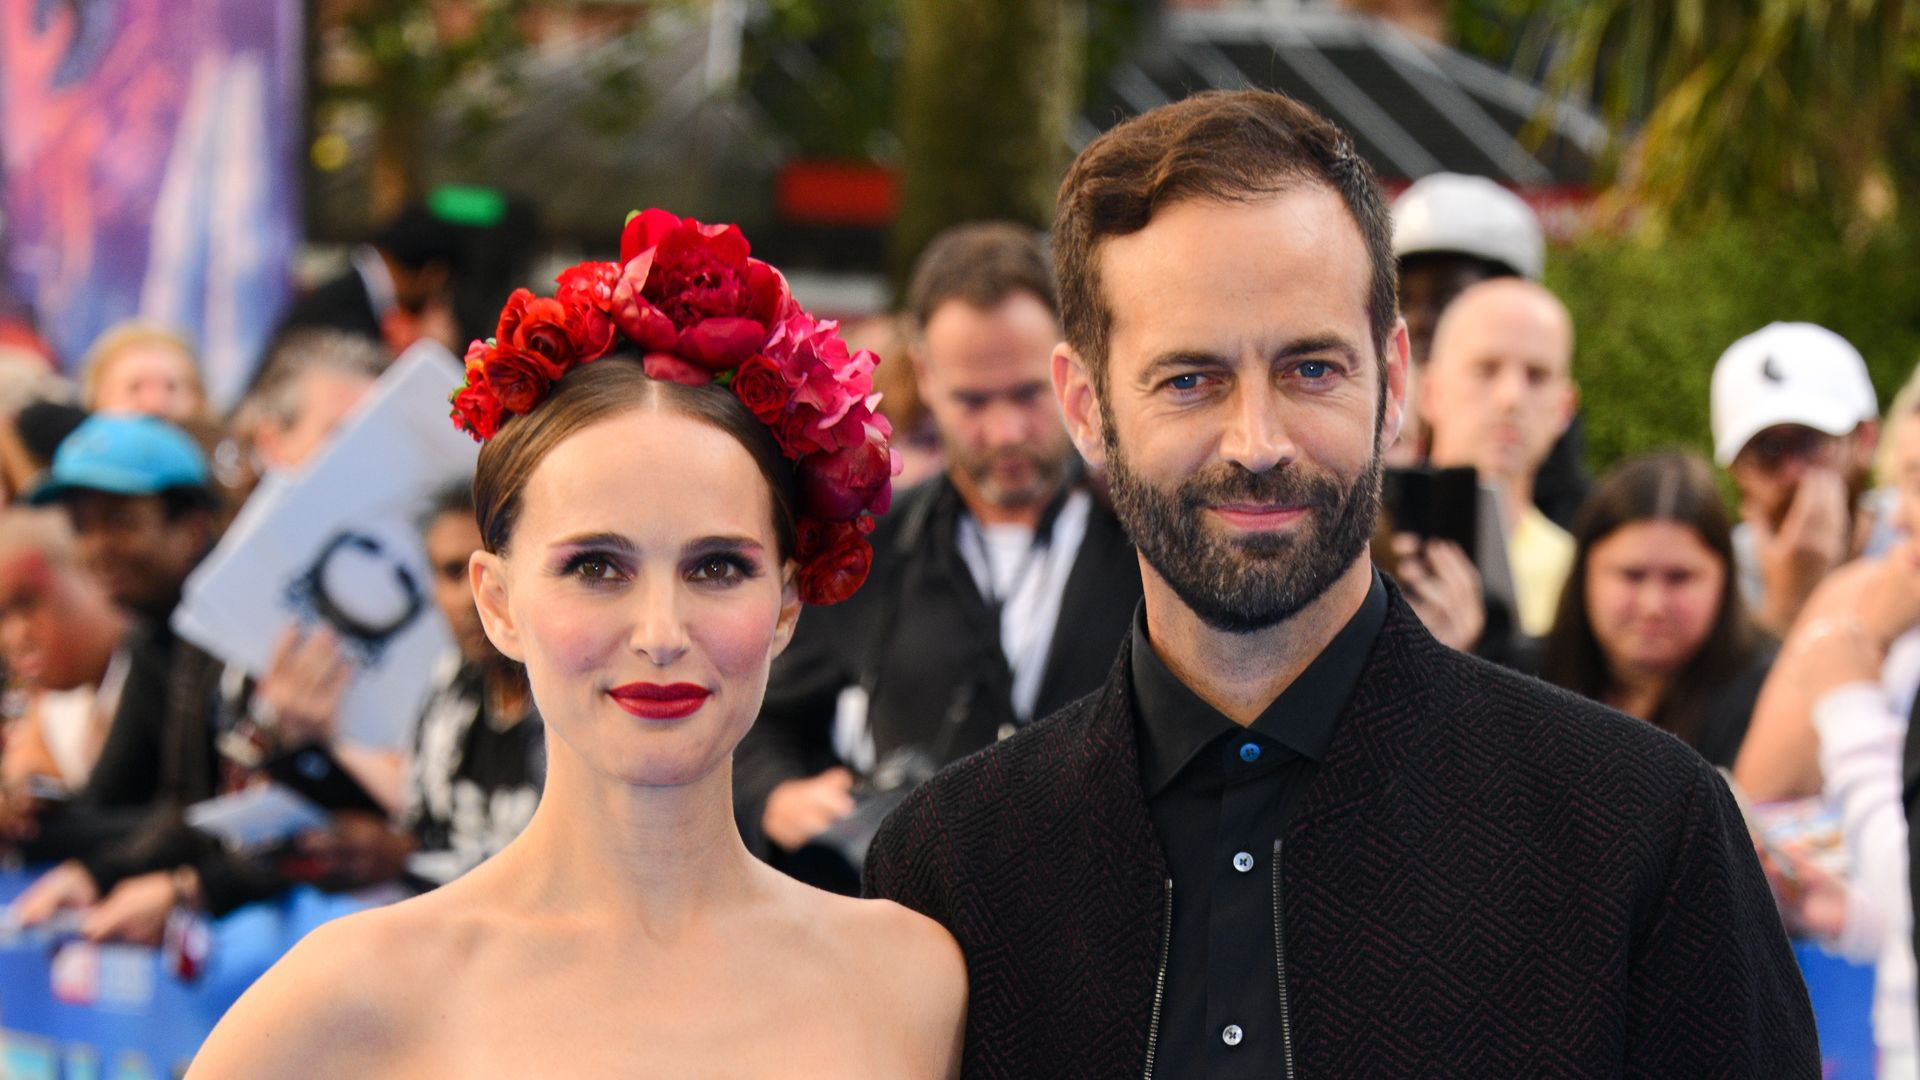 Natalie Portman and Benjamin Millepied attend the UK Gala Screening of "Thor: Love And Thunder" at Odeon Luxe Leicester Square on July 5, 2022 in London, England